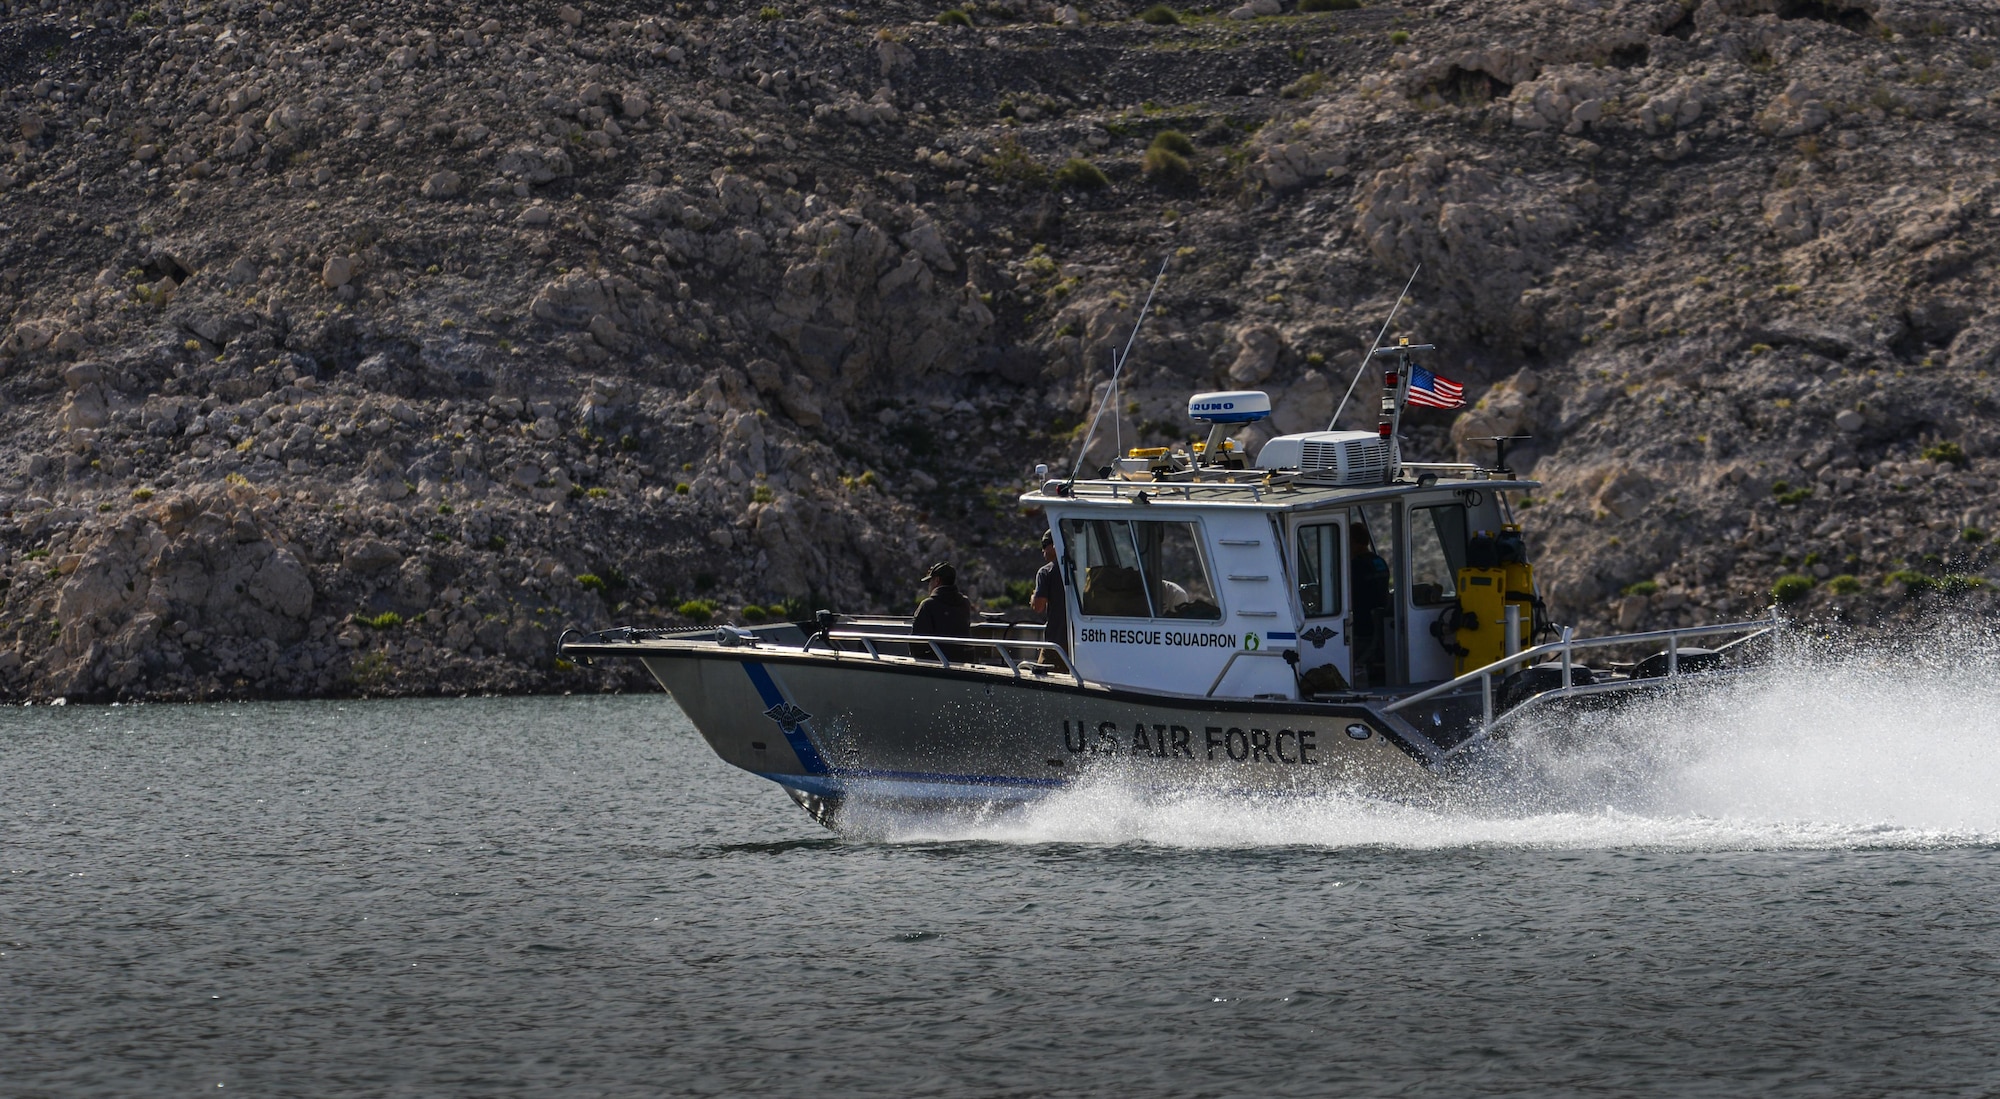 A Nellis Air Force Base, Nevada, 58th Rescue Squadron boat speeds across the water during a training exercise at Lake Mead, March 15, 2016. The boat picked up Pararescuemen after preforming static line jumps out of a C-130. Pararescue teams assault, secure, and dominate the rescue objective area utilizing any available DOD or Allied, air, land, or sea asset. (U.S. Air Force photo by Airman 1st Class Kevin Tanenbaum)